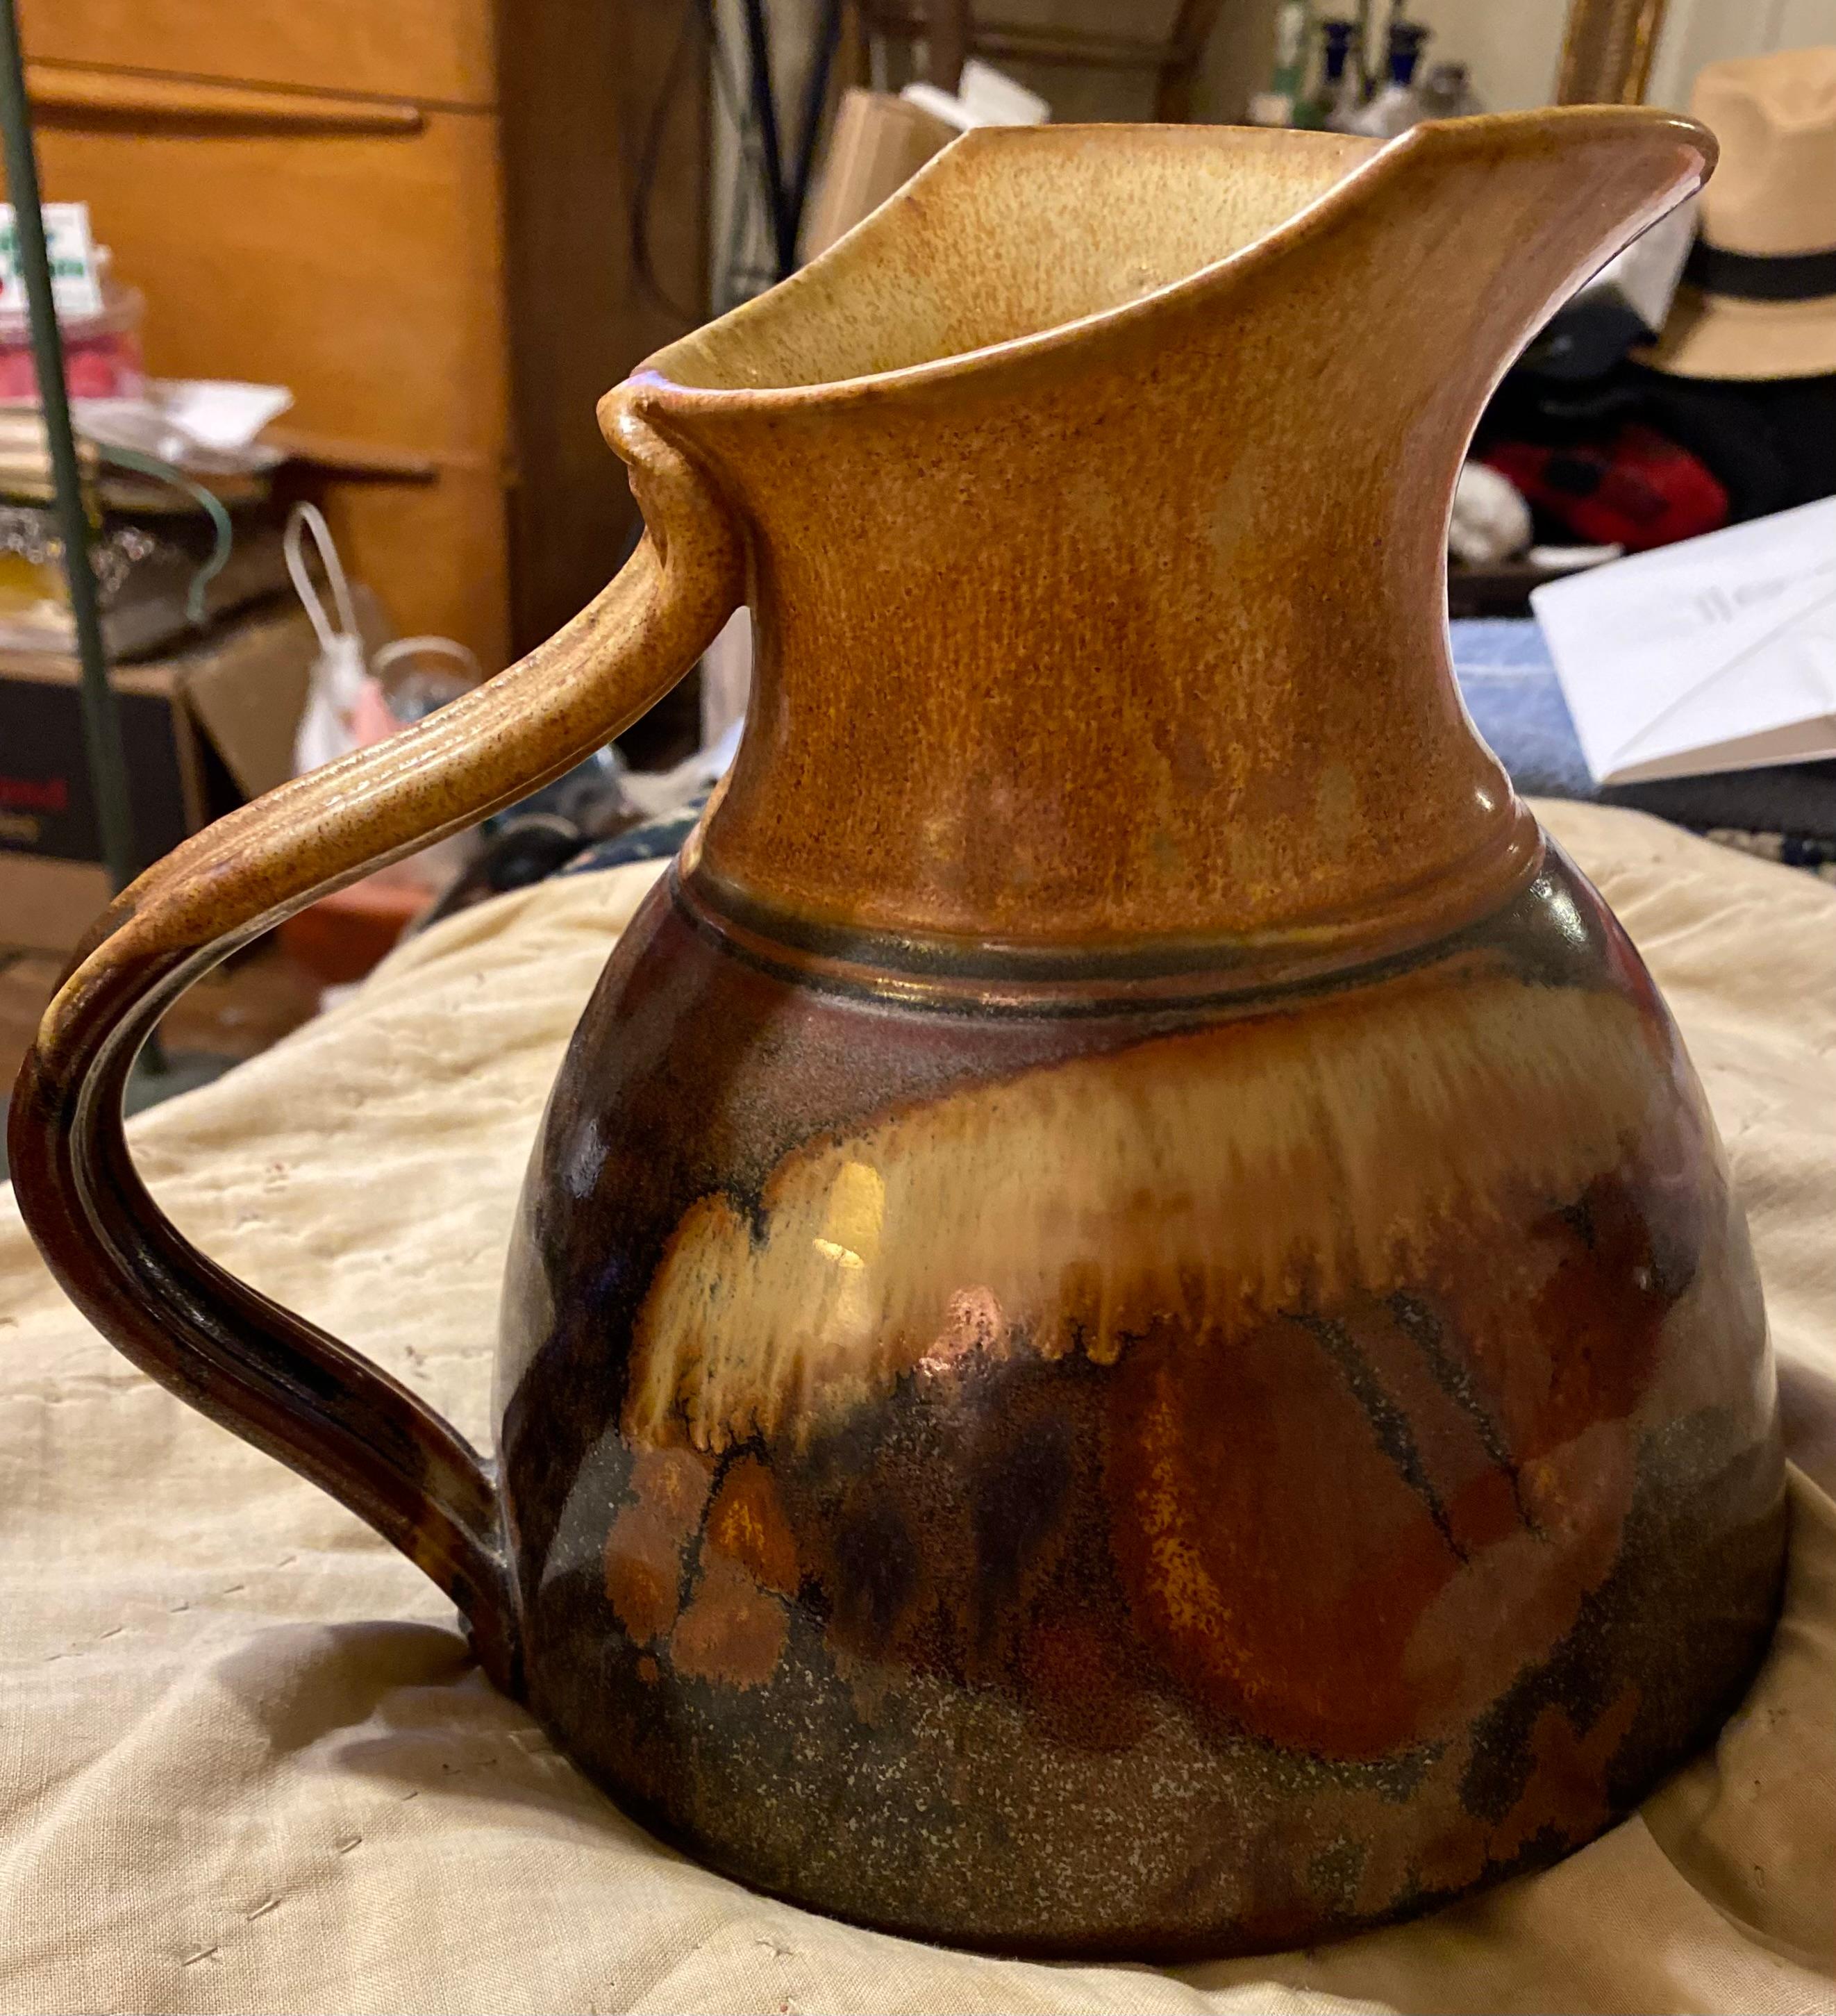 A large hand thrown stoneware water pitcher with a very large spout...signed on the bottom by the artist. Richard Stafford Bainbridge Island Washington. Brown stoneware with a black glaze.